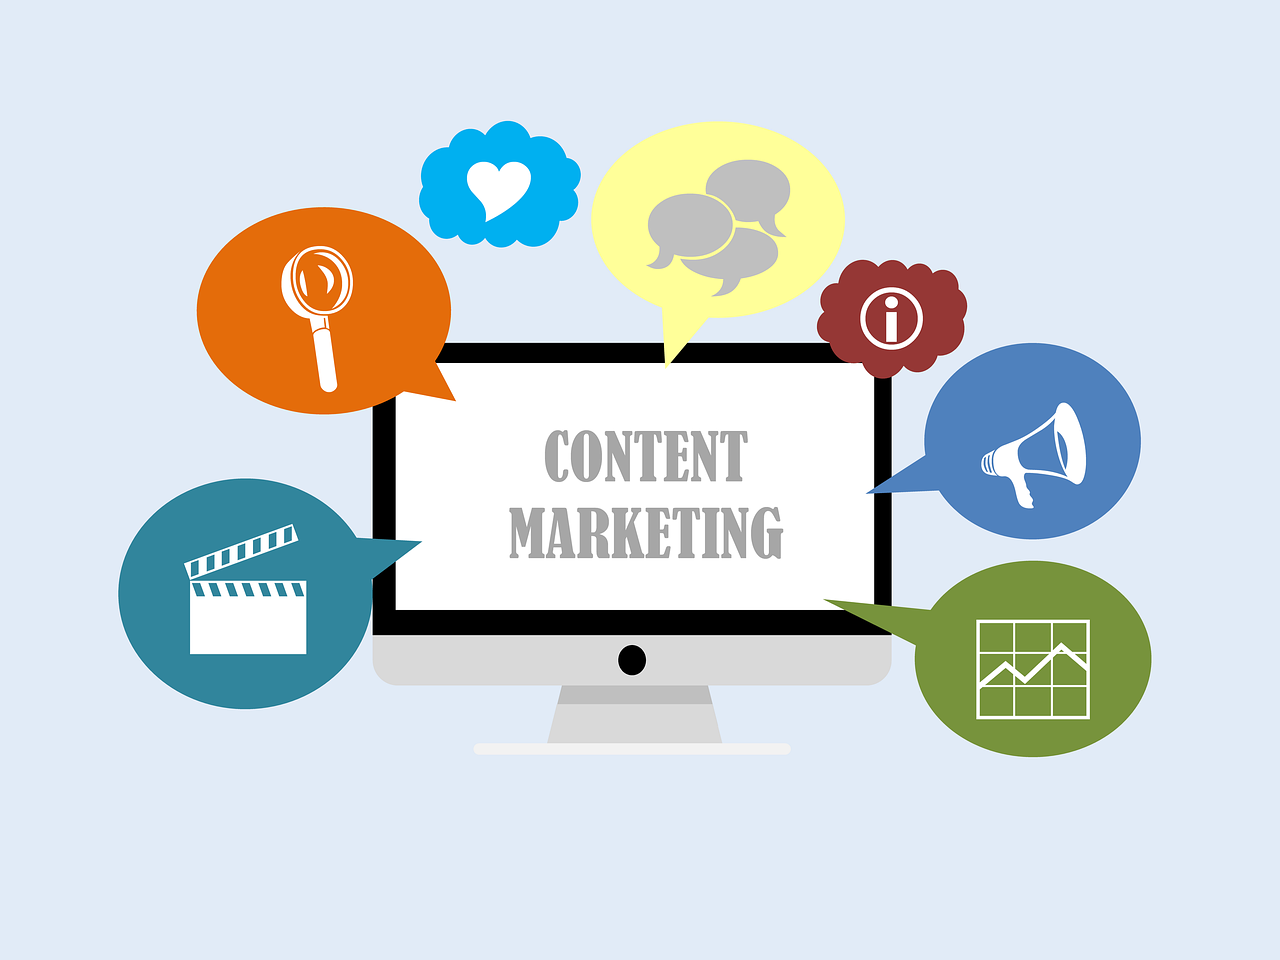 Content Marketing: Five Tips for New Businesses